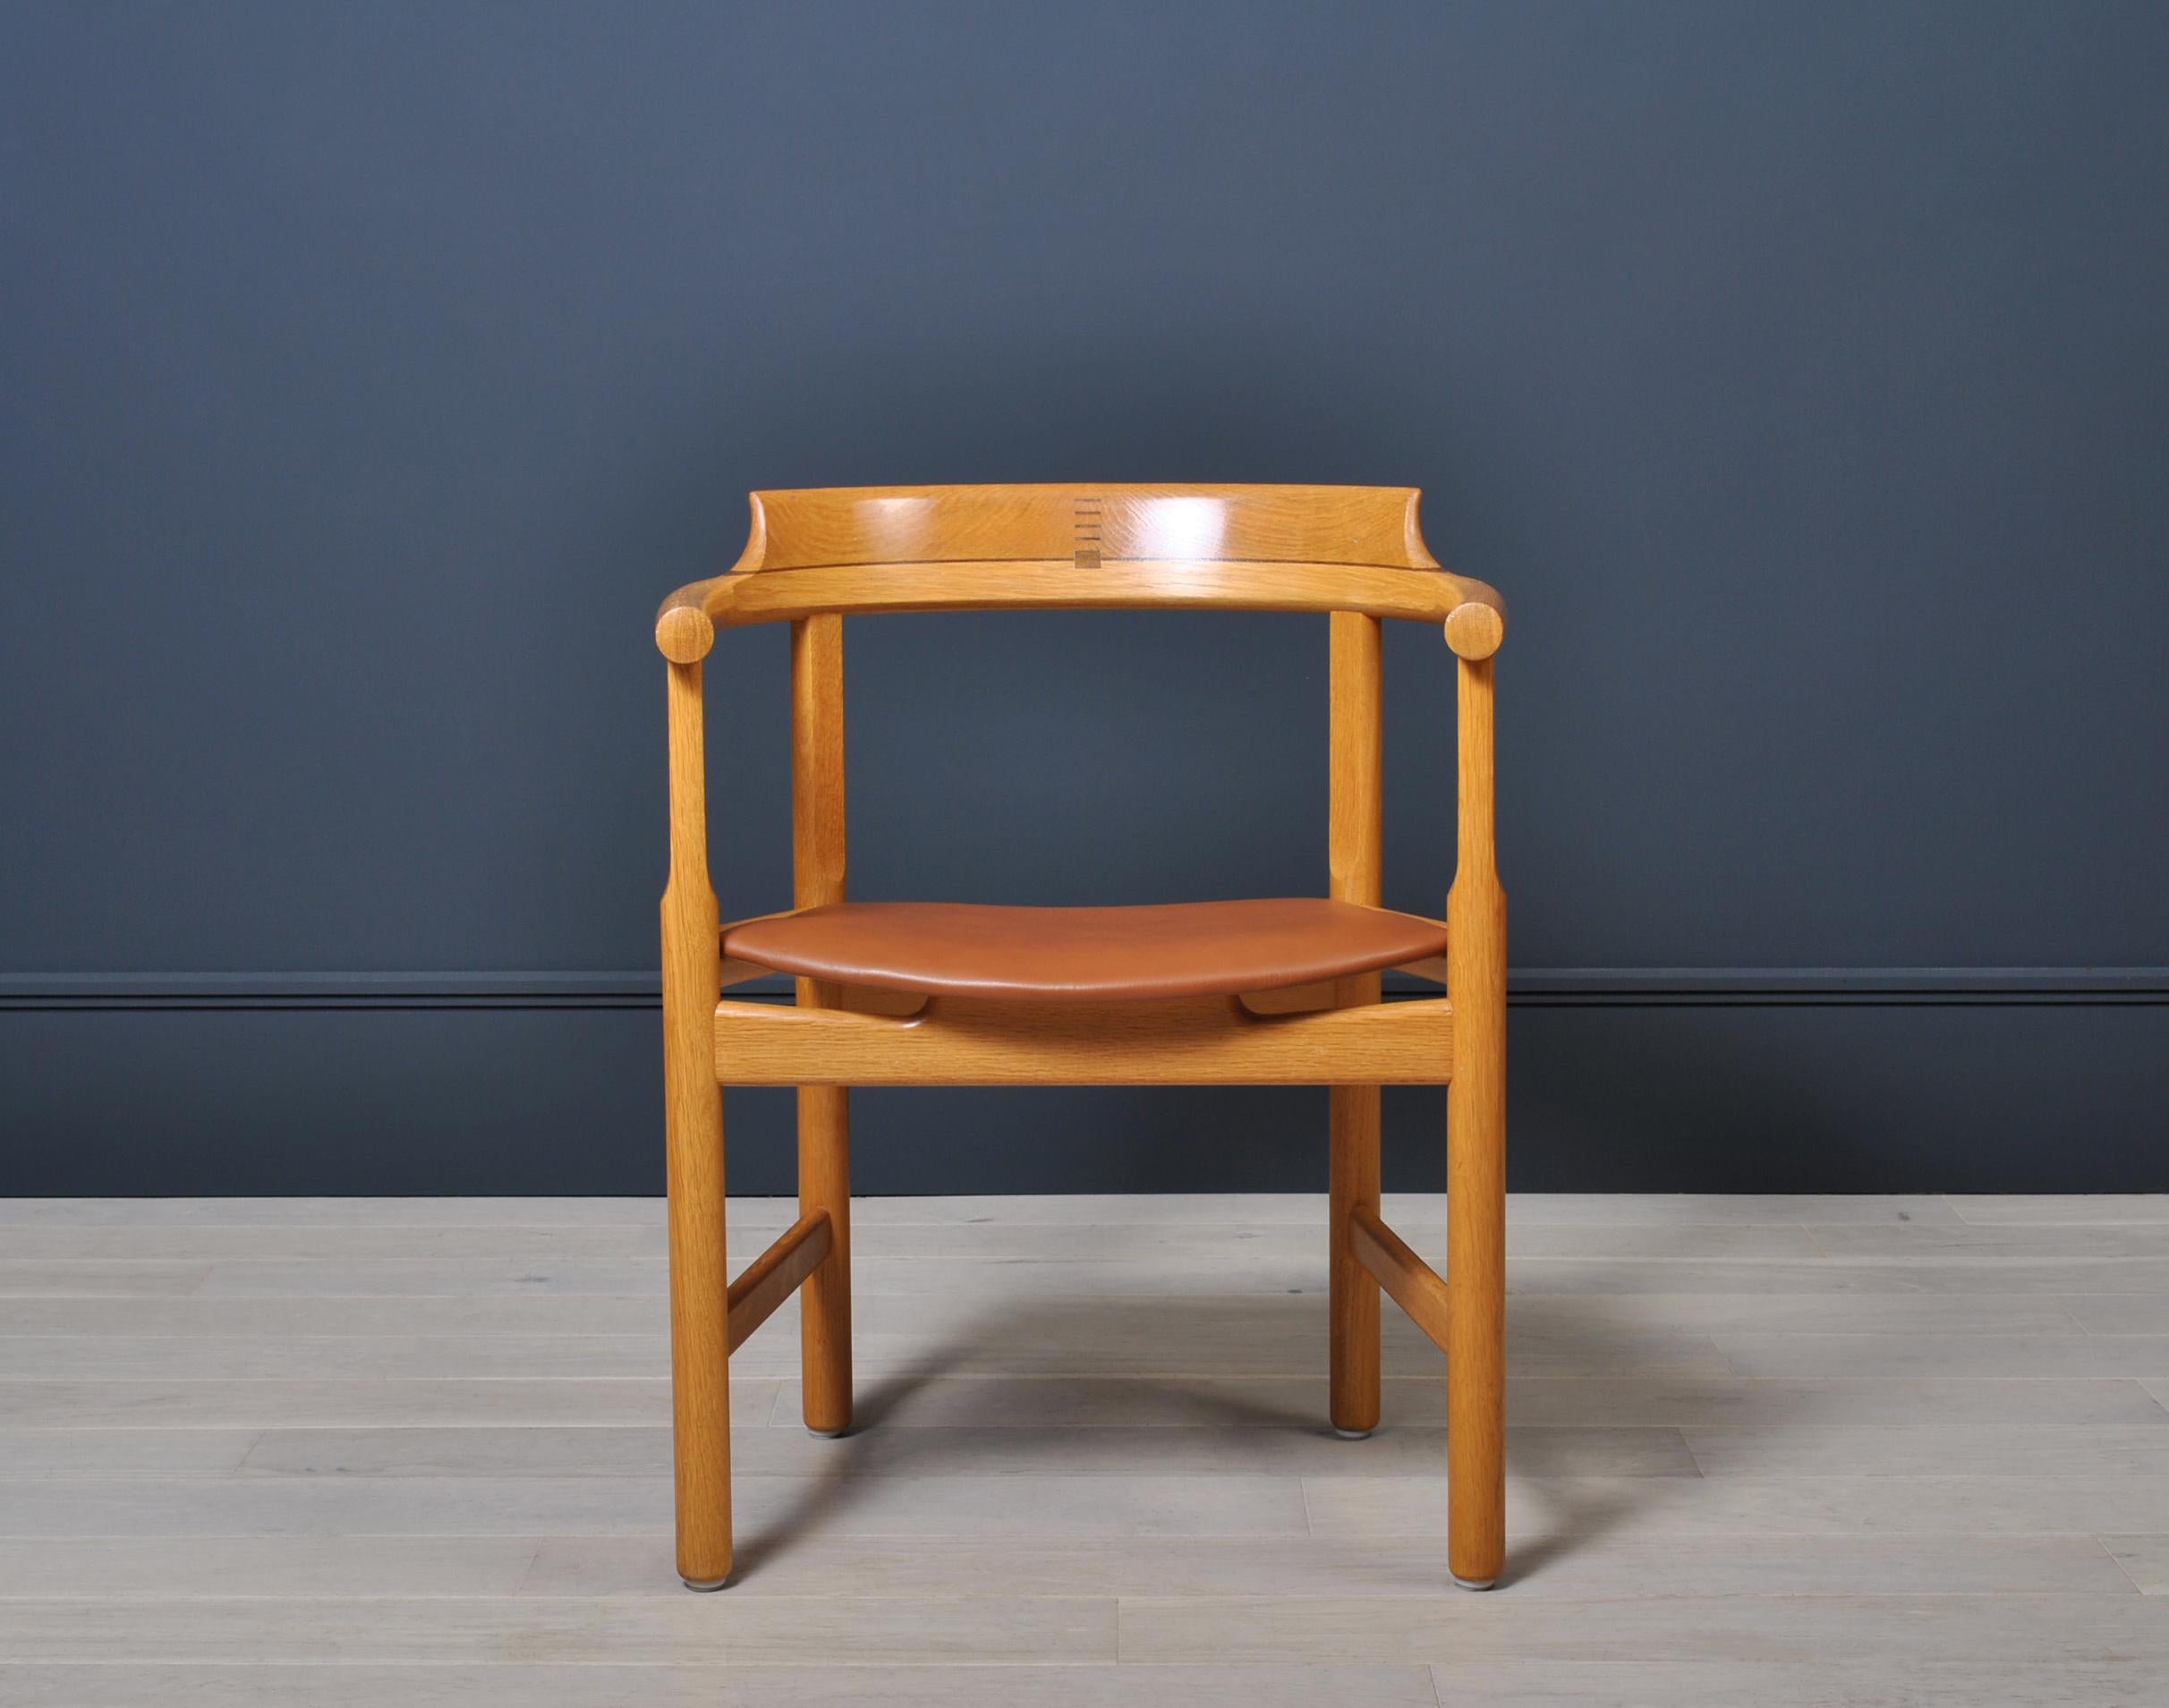 Incredible original Hans J Wegner PP52 chair. Constructed from European oak with Wenge wood visible exposed joints and feet. Absolutely superb craftsmanship from PP Mobler, circa 1970. These are highly unusual designs with great attention to detail,